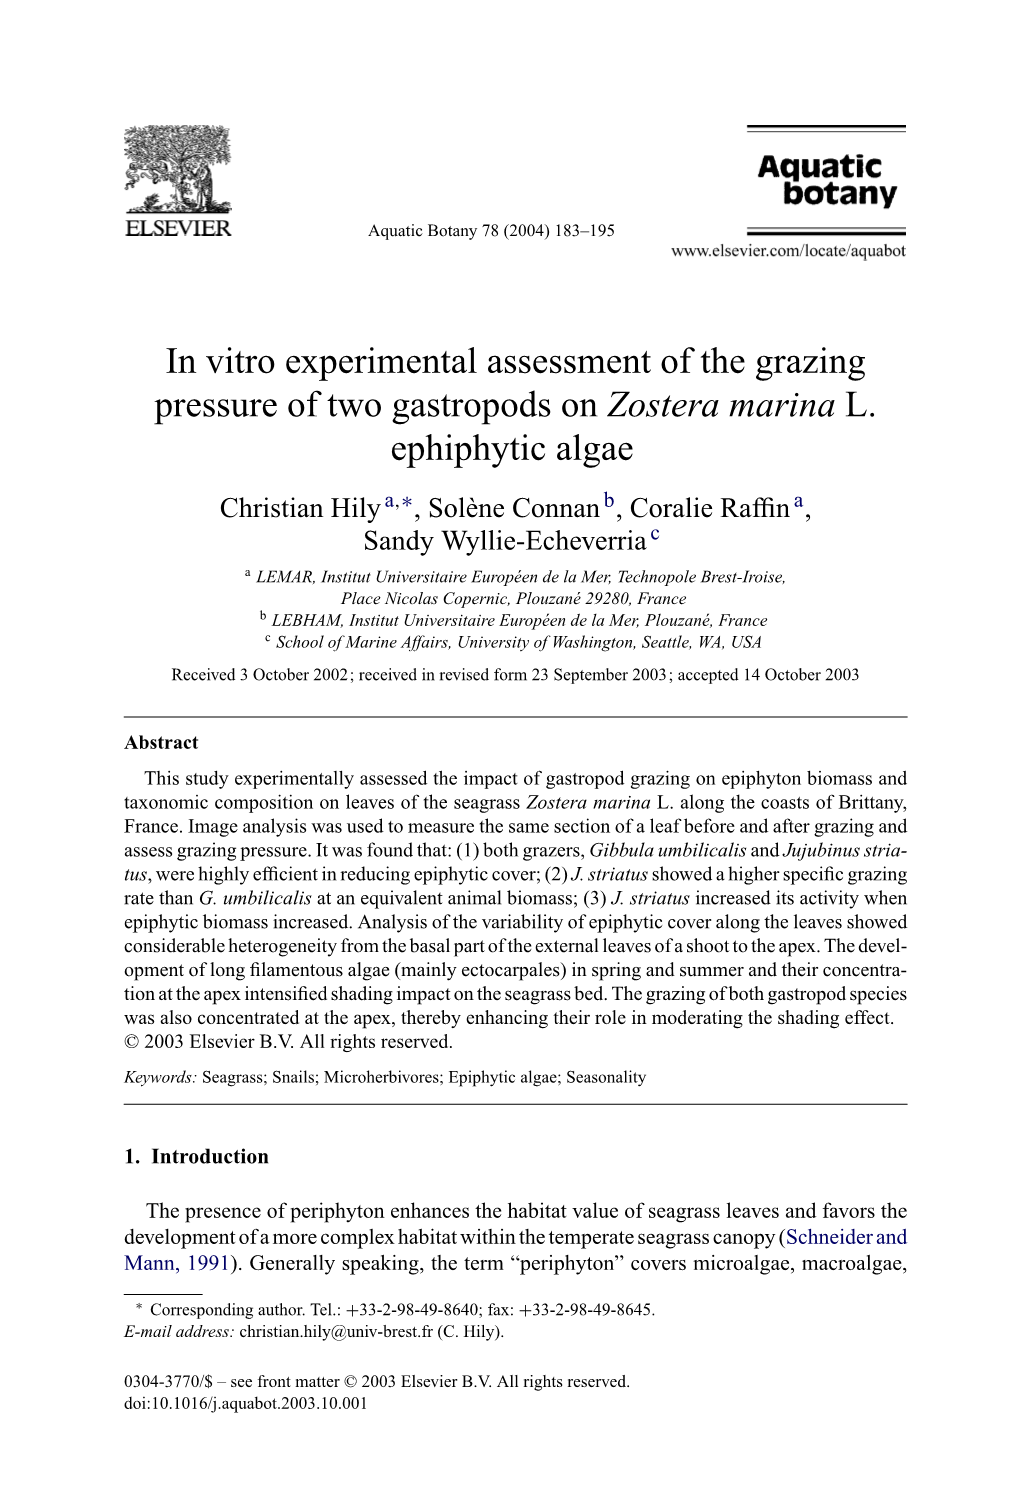 In Vitro Experimental Assessment of the Grazing Pressure of Two Gastropods on Zostera Marina L. Ephiphytic Algae